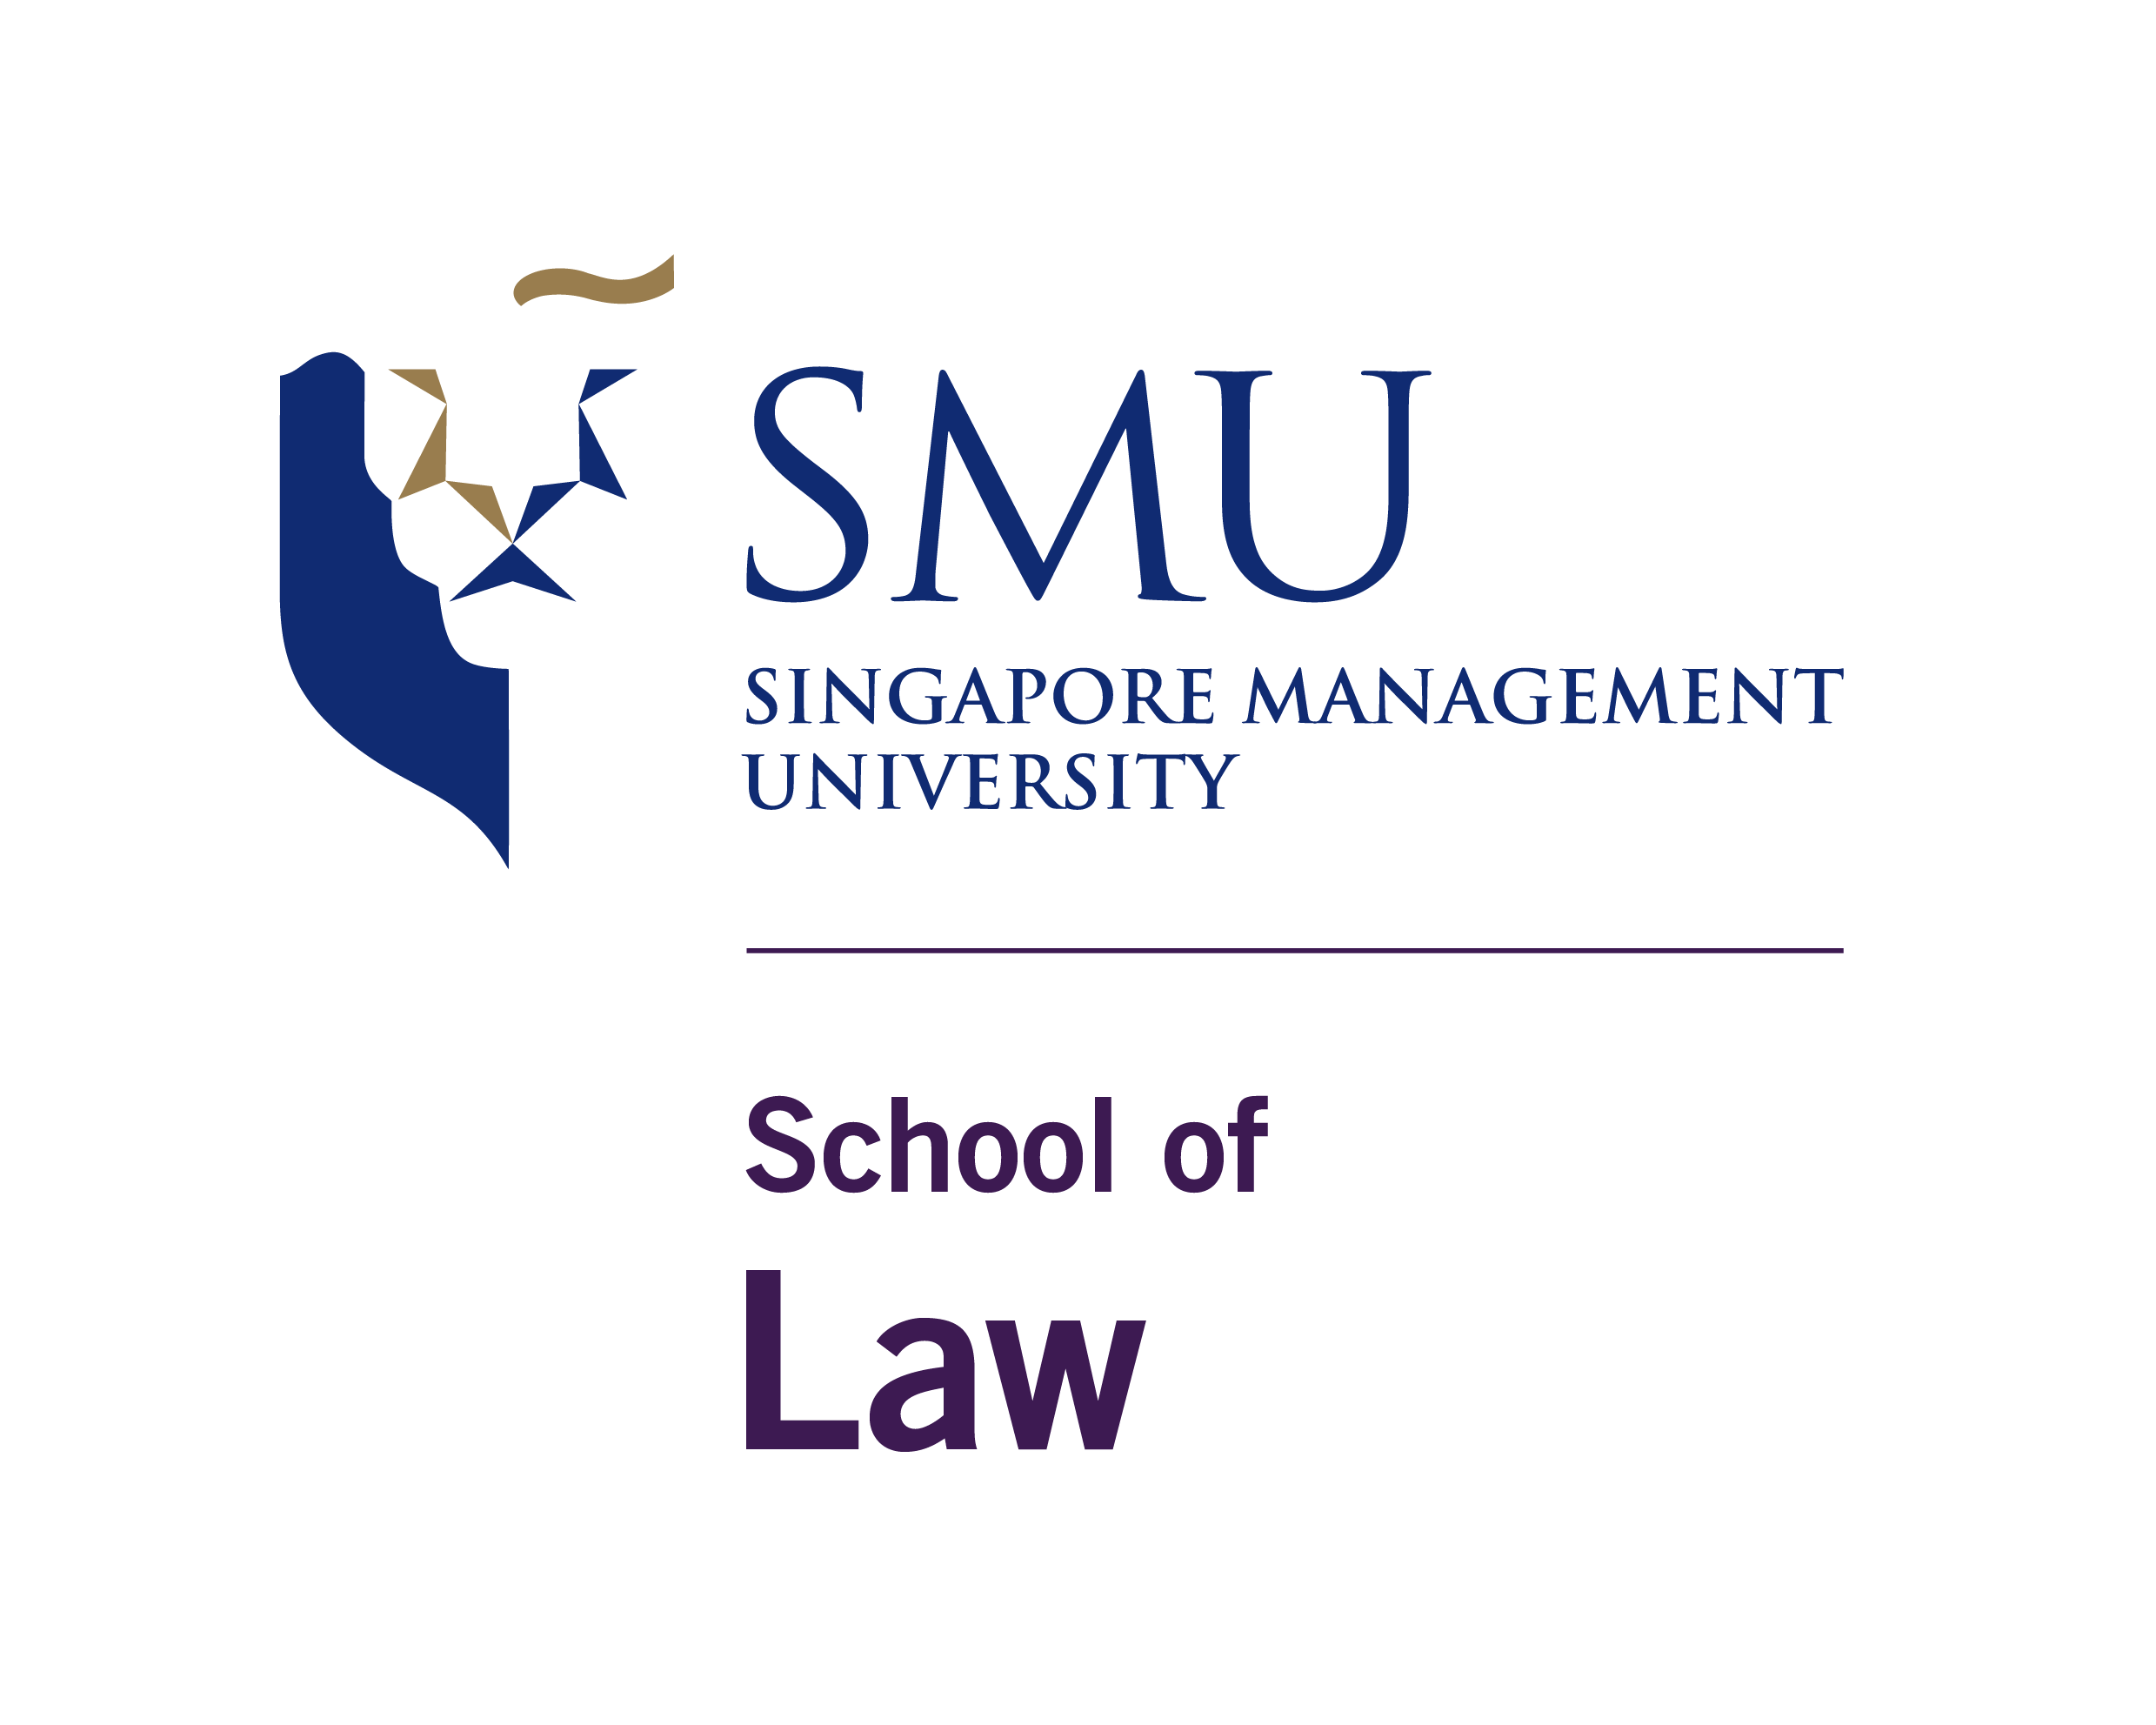 School of Law Most Popular Papers (May-Jul 2020)